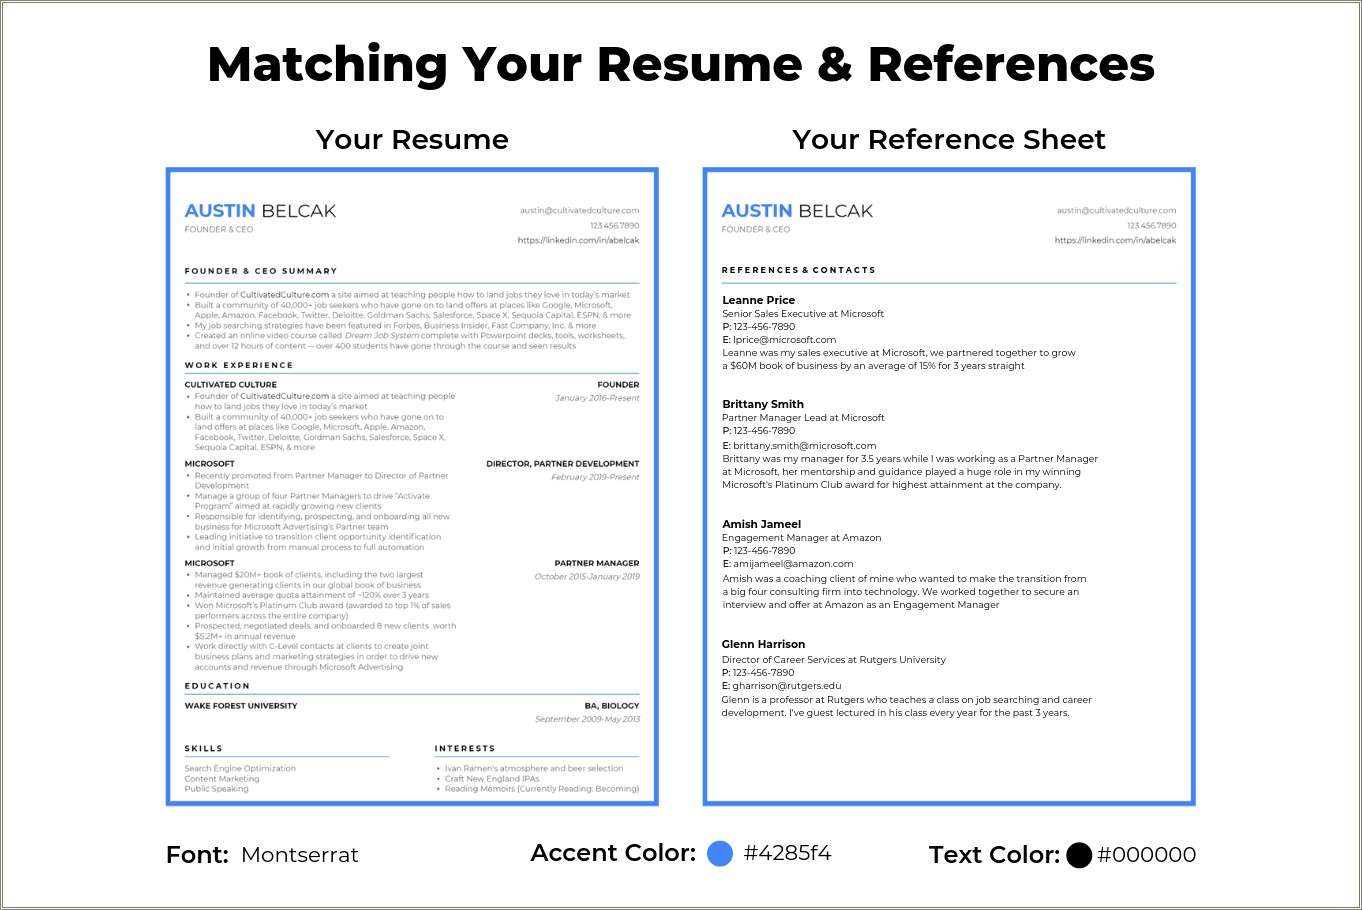 Best Refernces To Include On Your Resume